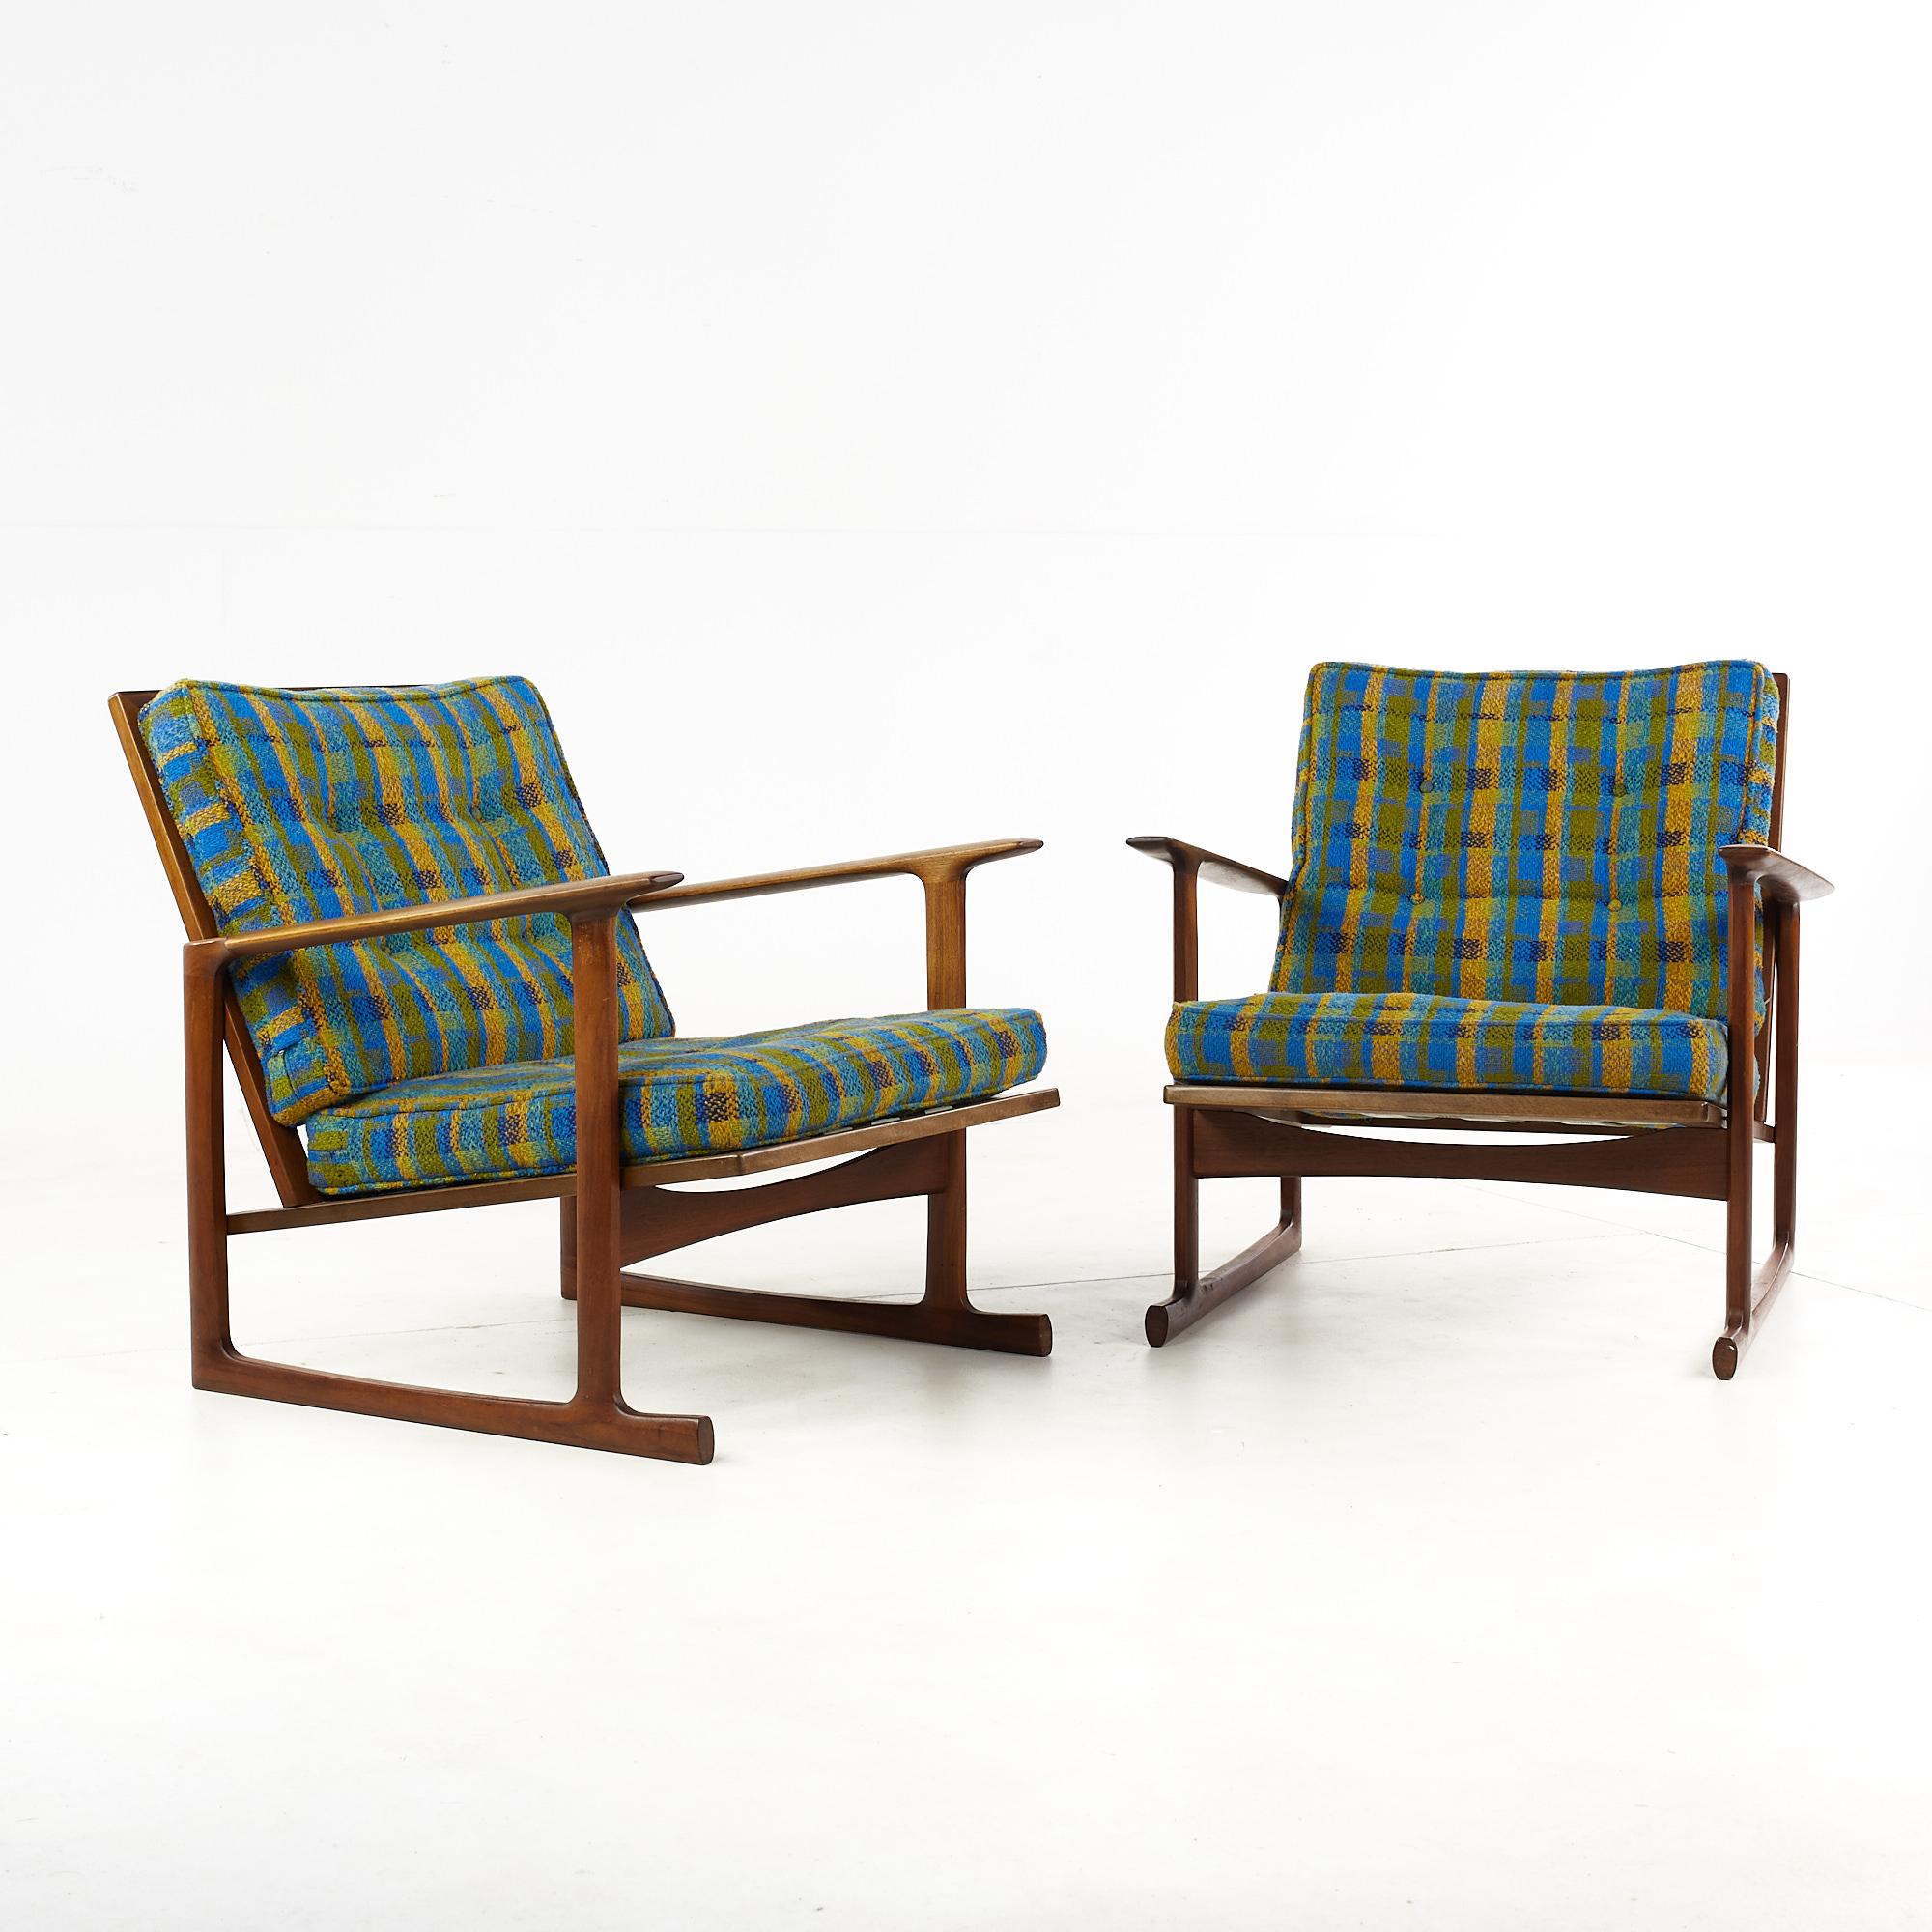 Kofod Larsen for Selig Mid Century Sleigh Leg Low Back Lounge Chairs - Pair

These chairs measure: 29 wide x 31 deep x 28 inches high, with a seat height of 16 and arm height/chair clearance of 22 inches

All pieces of furniture can be had in what